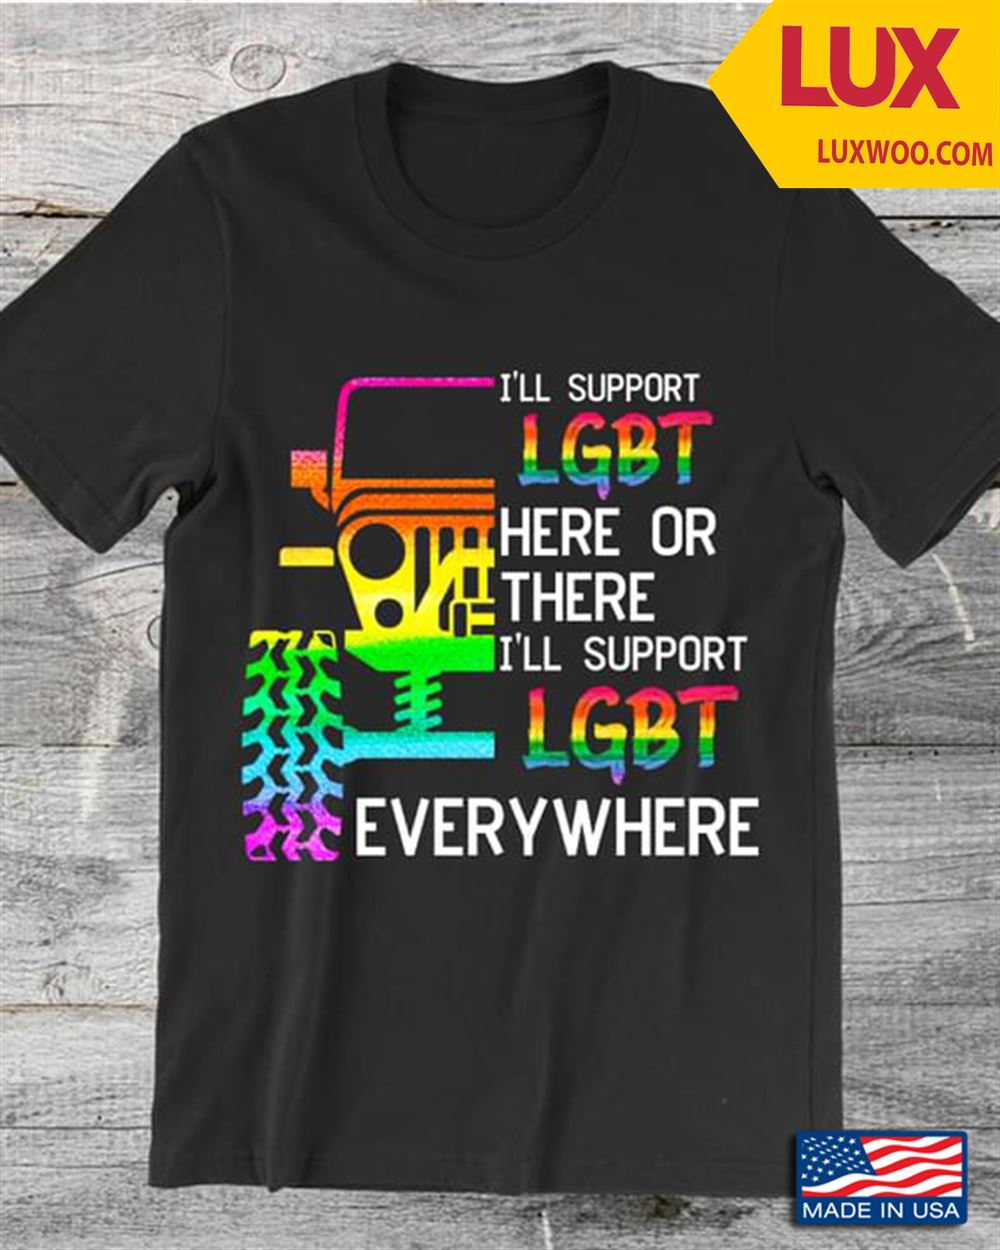 Jeep Ill Support Lgbt Here Or There Ill Support Lgbt Everywhere For Lgbt Tshirt Size Up To 5xl